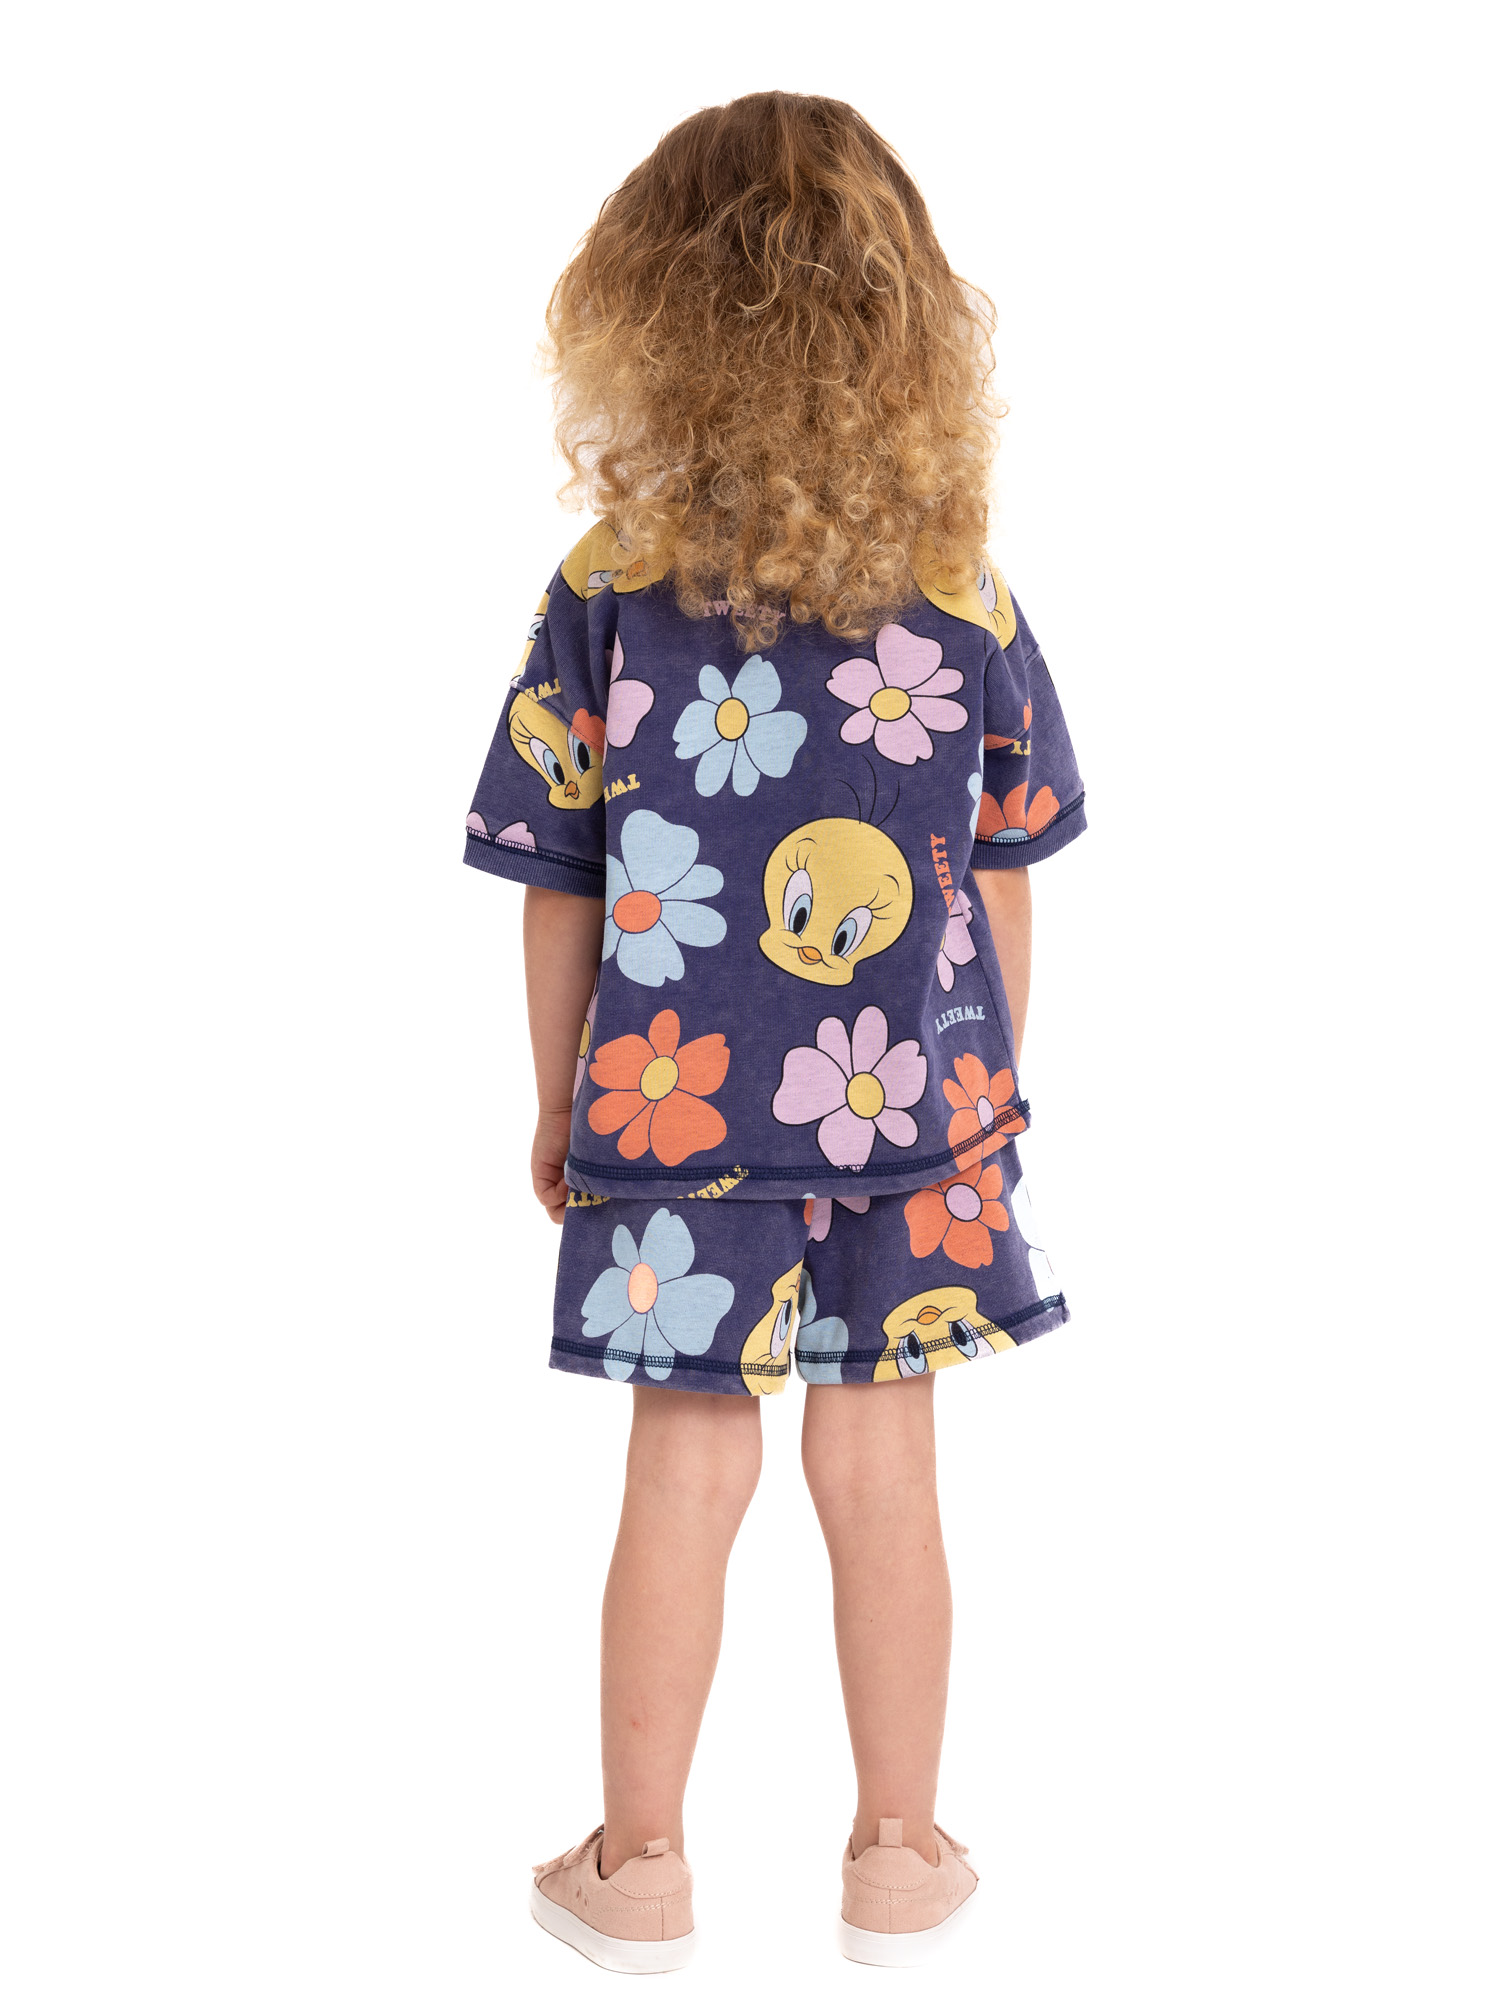 Looney Tunes Toddler Girls Tee and Shorts Set, 2-Piece, Sizes 12M-5T - image 3 of 10